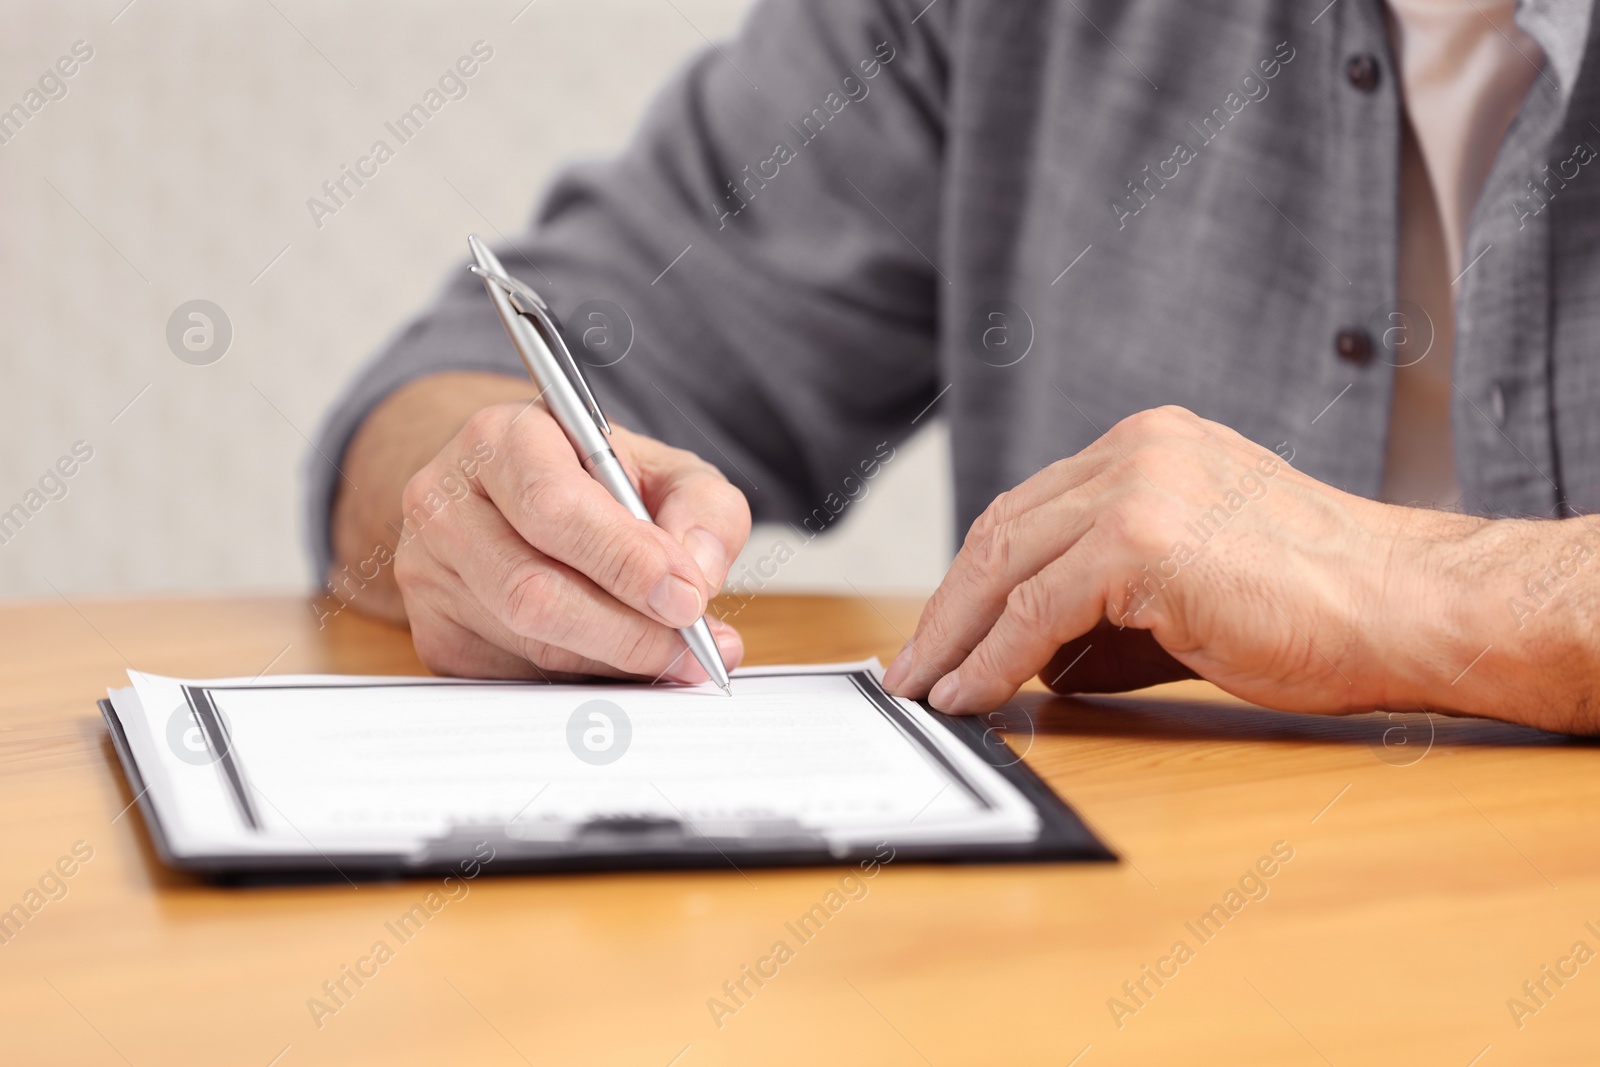 Photo of Senior man signing Last Will and Testament at wooden table indoors, closeup